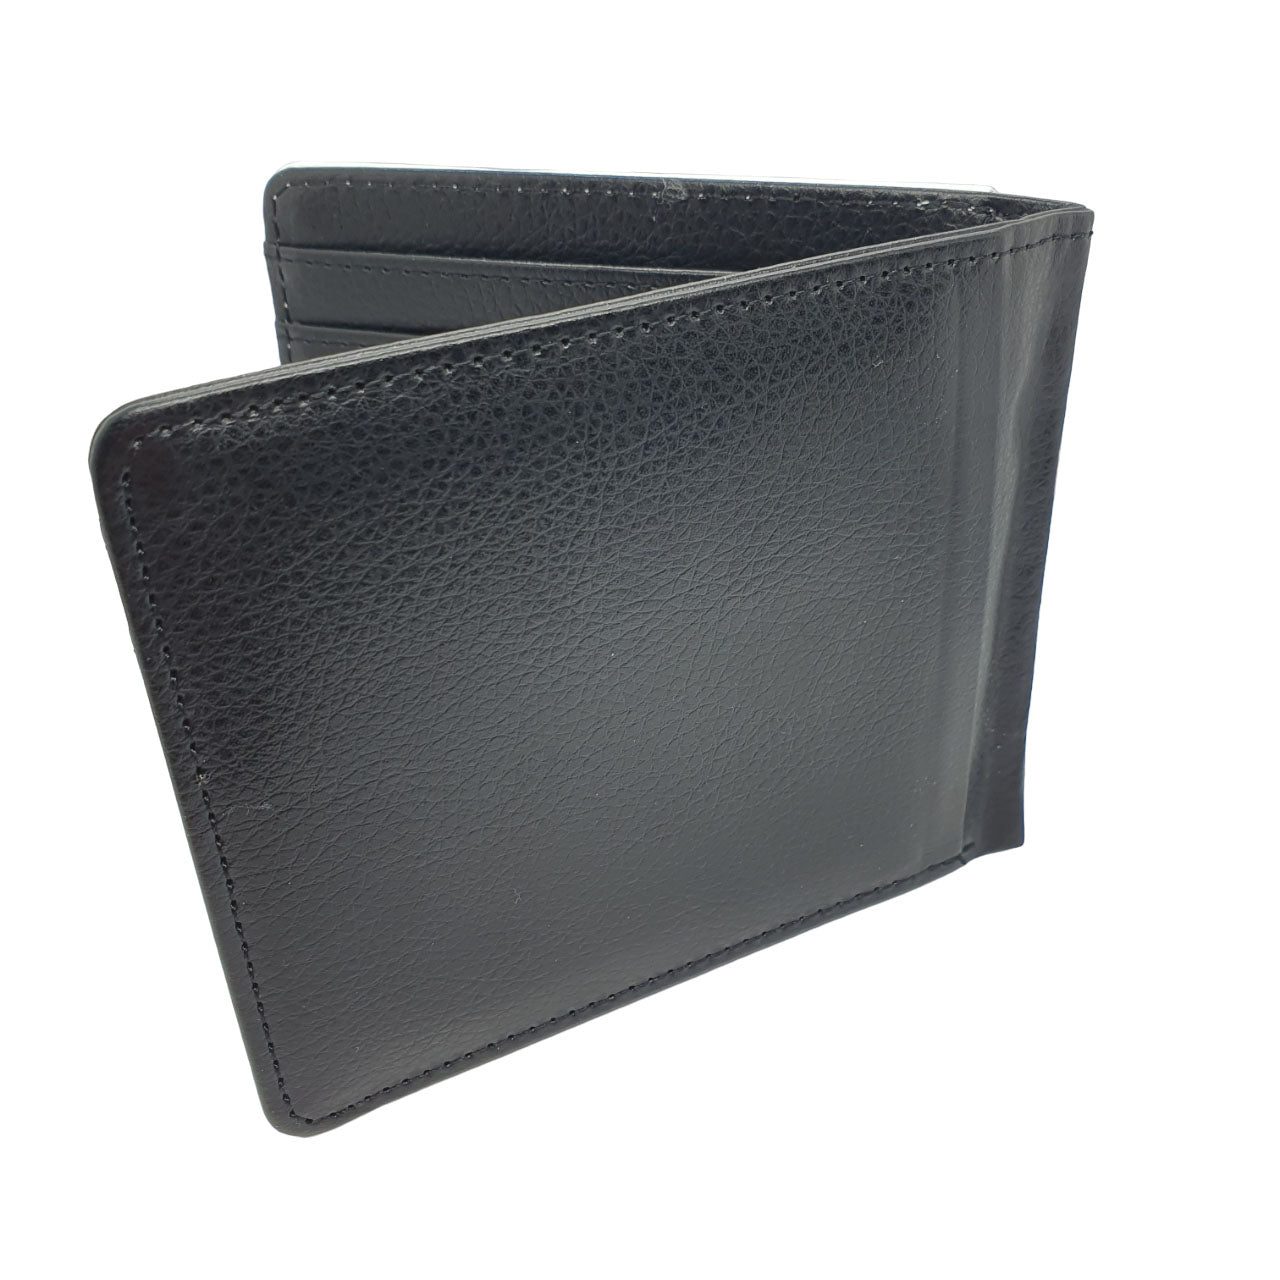 back-of-open-pu-wallet-showing-black-leather-effect